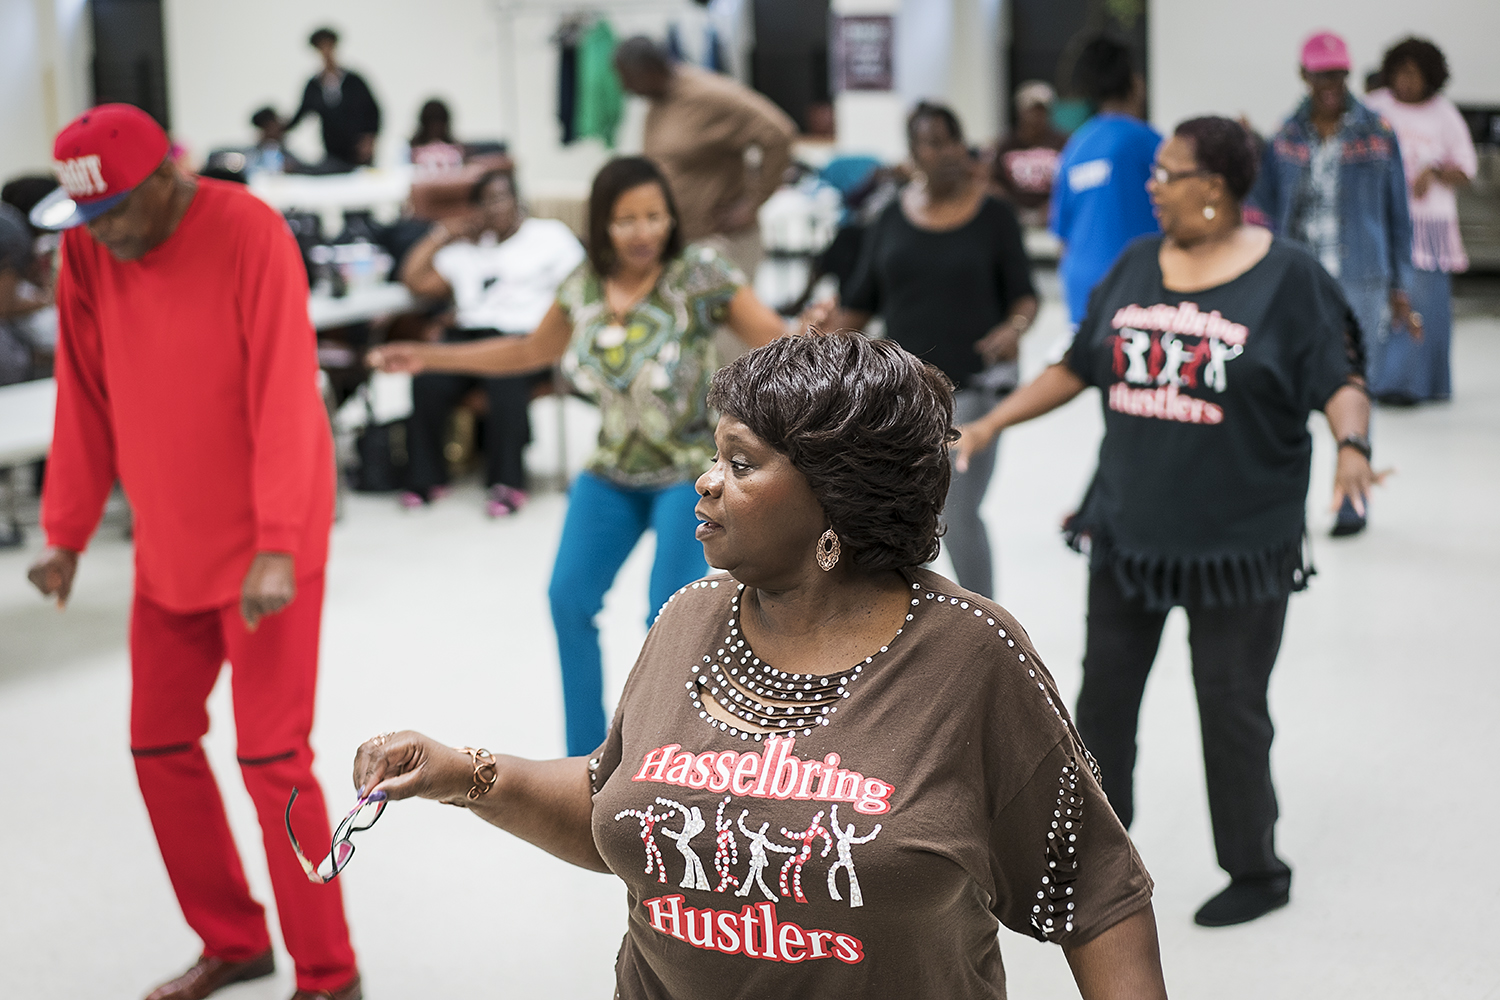 Hasselbring Hustlers committee chairperson Marva Johnson of Flint (center) wears her custom Hustlers shirt as she dances. She ended up starting a class at the center to teach others how to customize their own shirts.